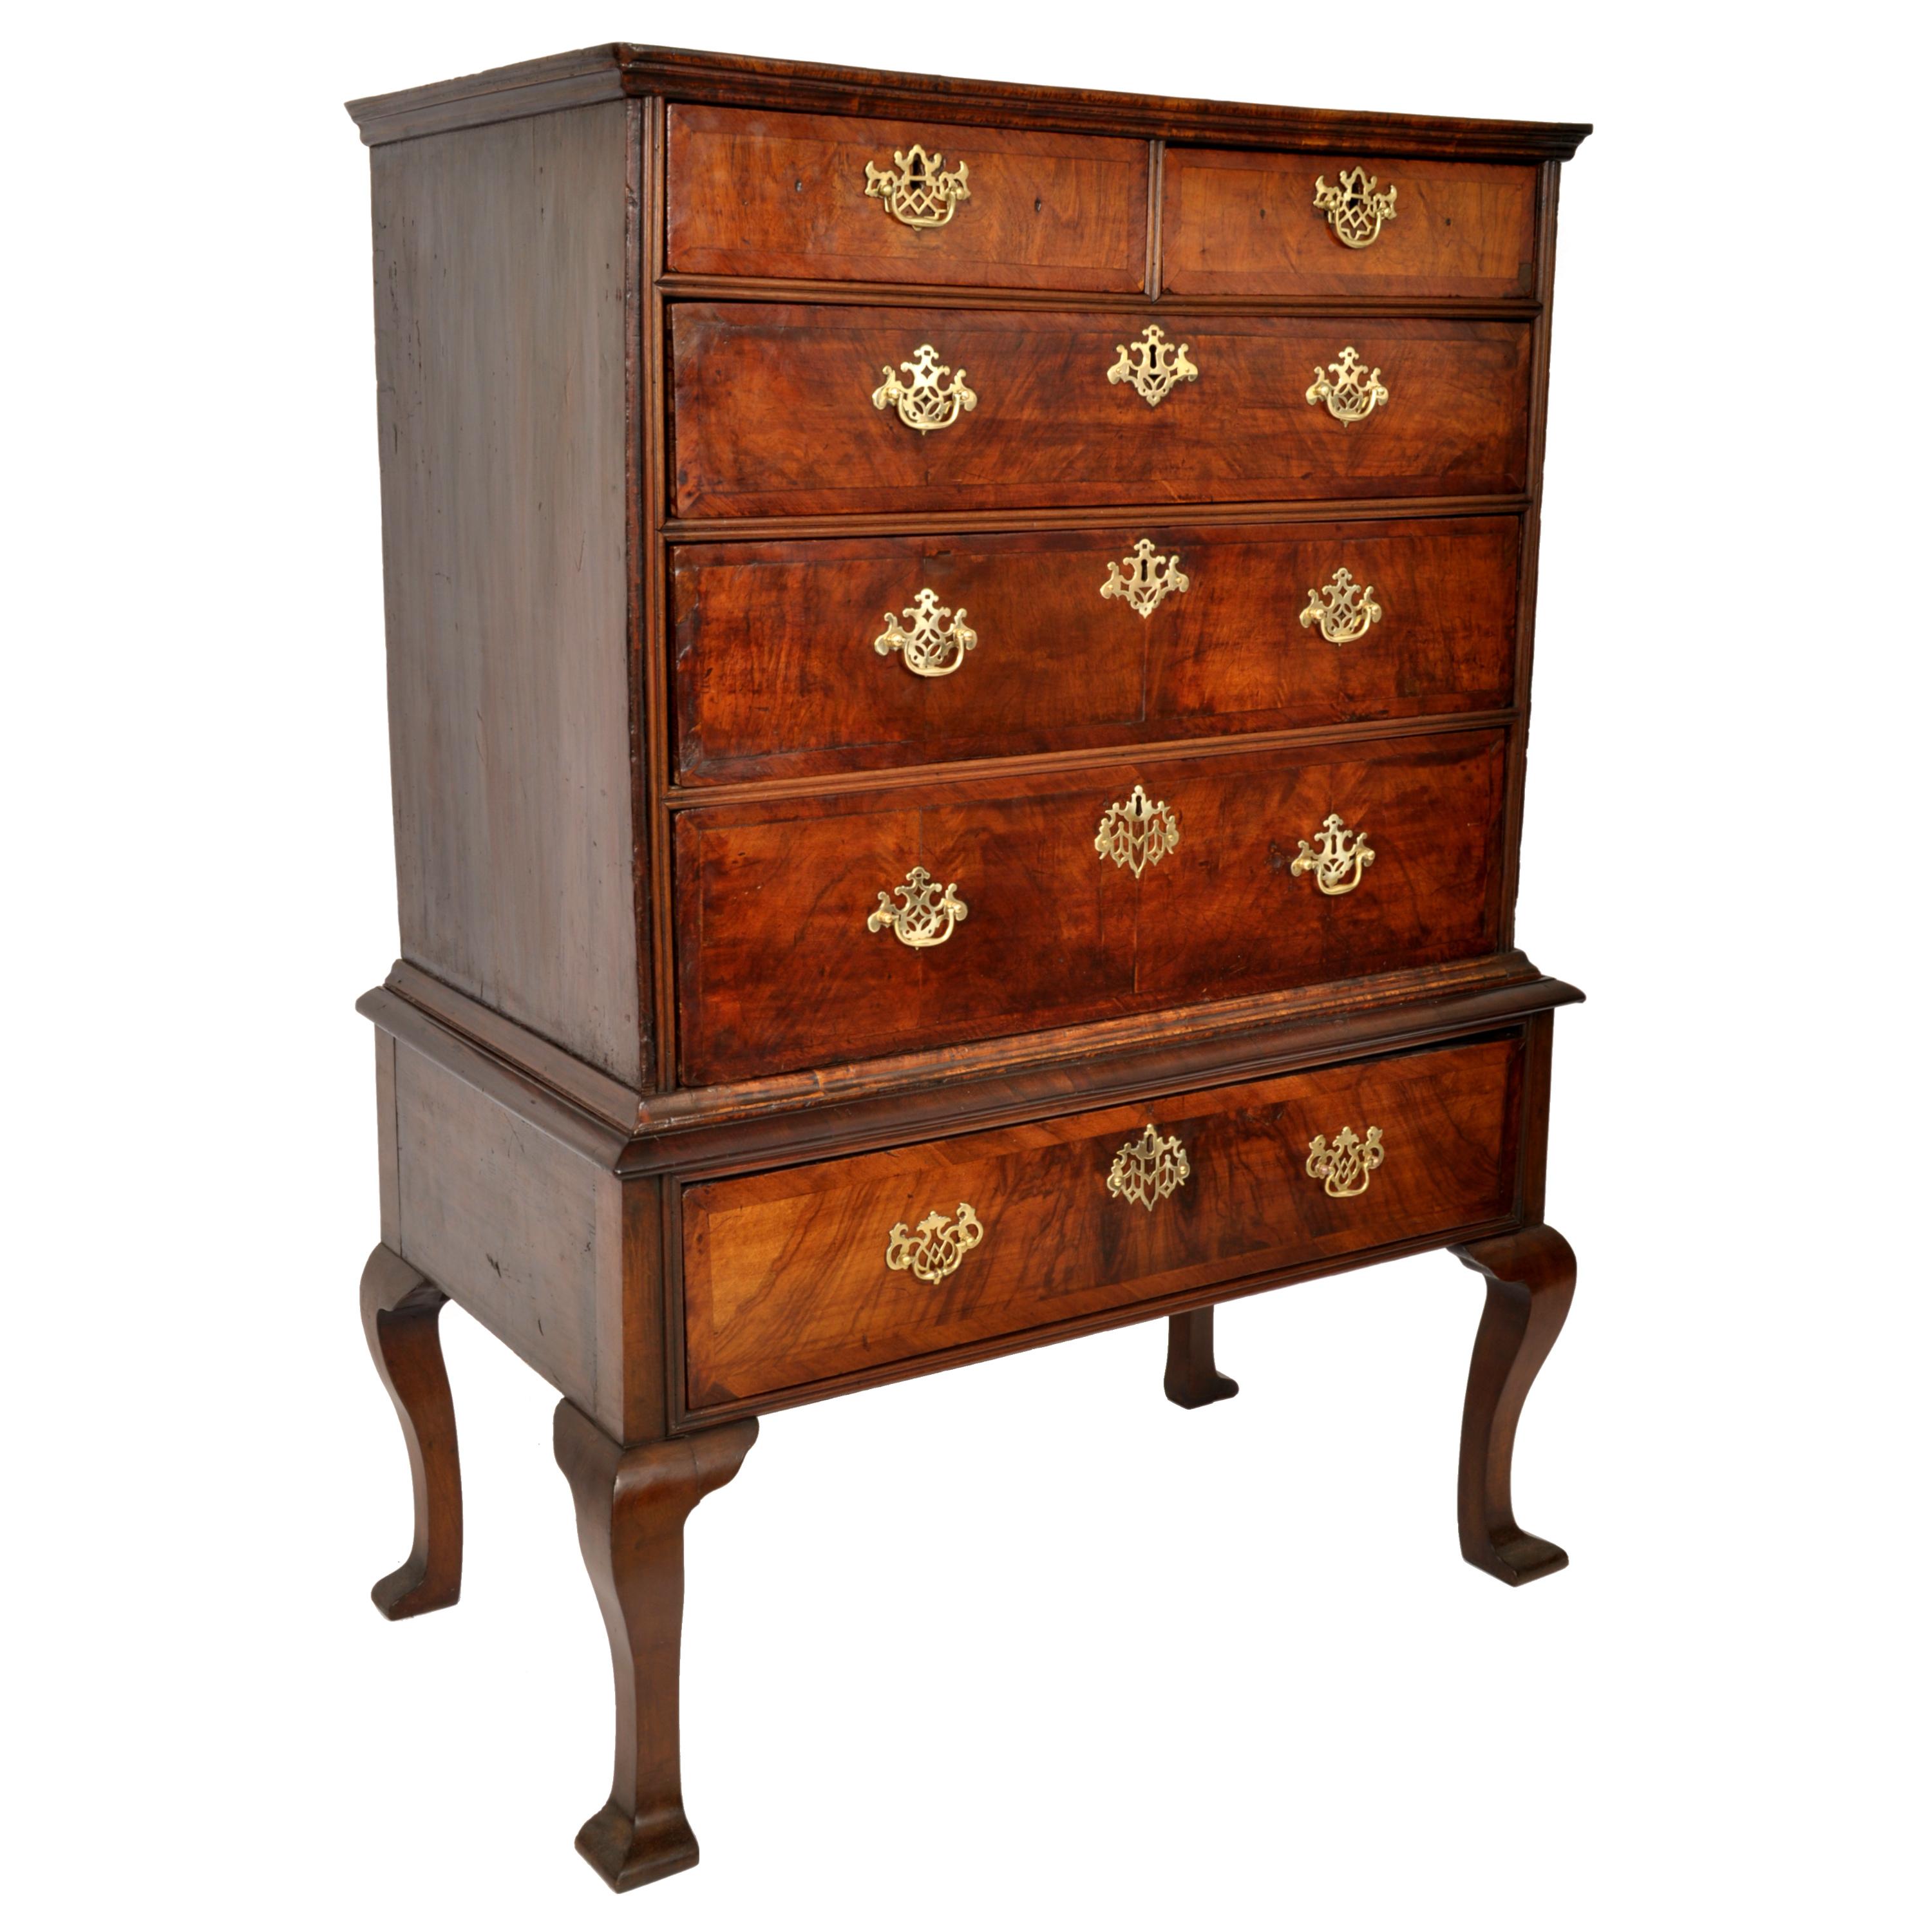 A fine & handsome walnut Queen Anne chest on stand/highboy, dating to the early George II period, circa 1740.
This unusually diminuitive highboy is made of the finest figured walnut, the highboy having a stepped cornice above two short drawers over